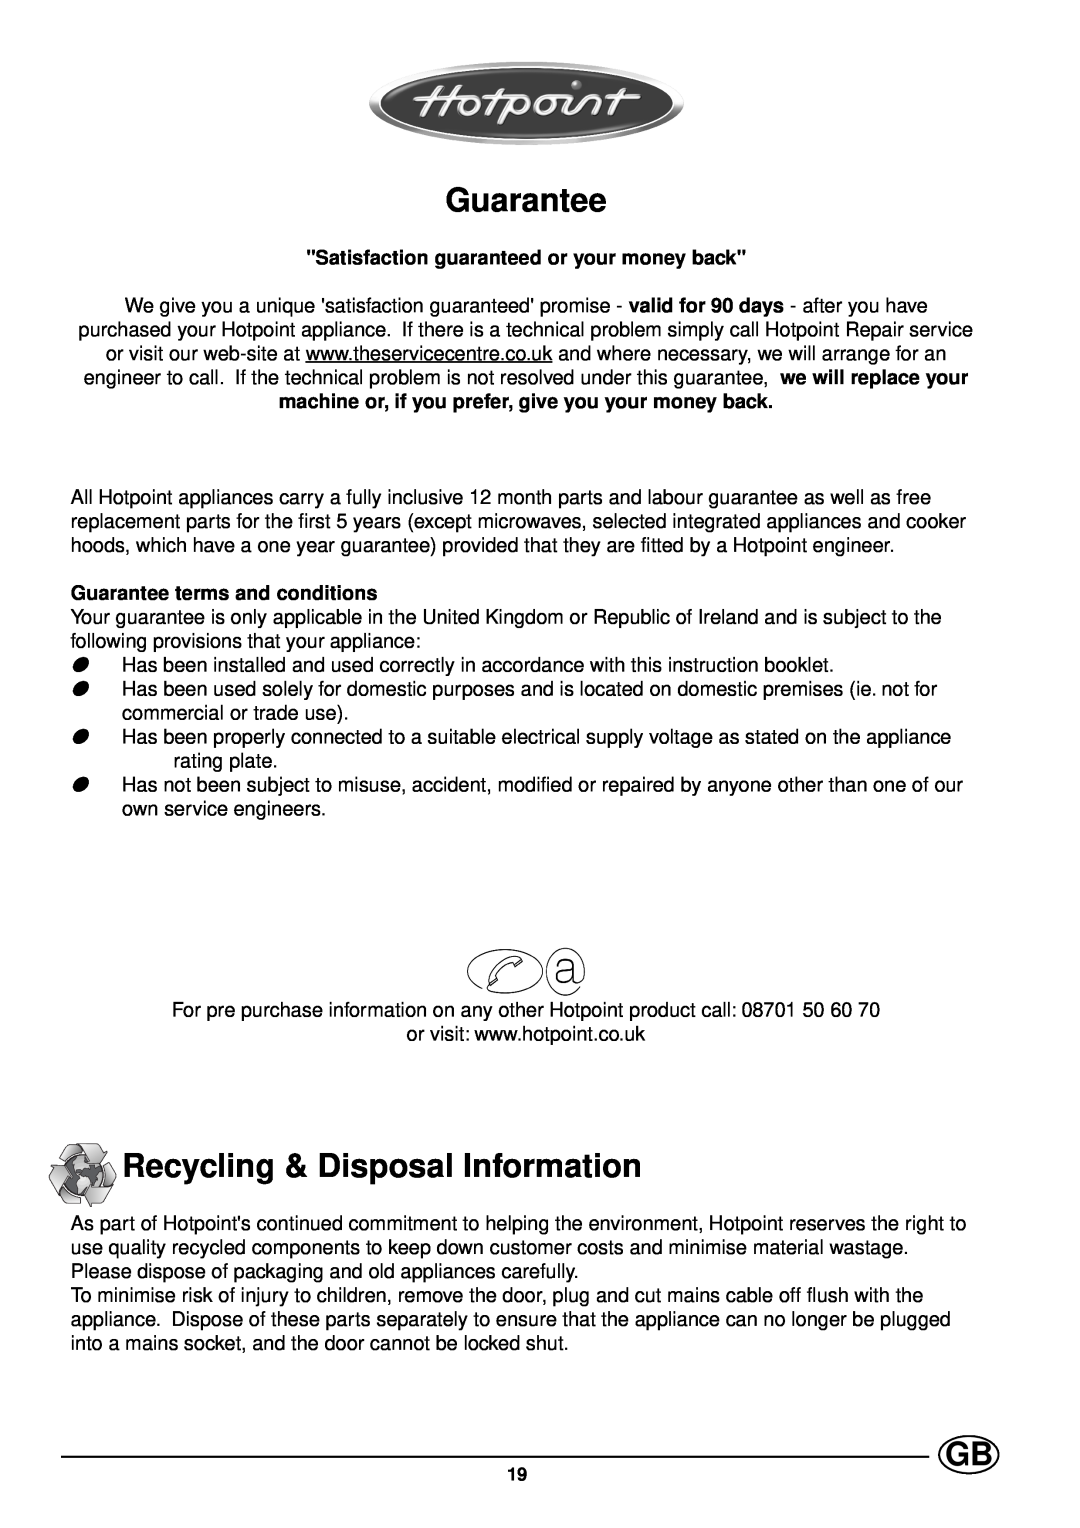 Hotpoint SD97E manual Guarantee, Recycling & Disposal Information, Satisfaction guaranteed or your money back 